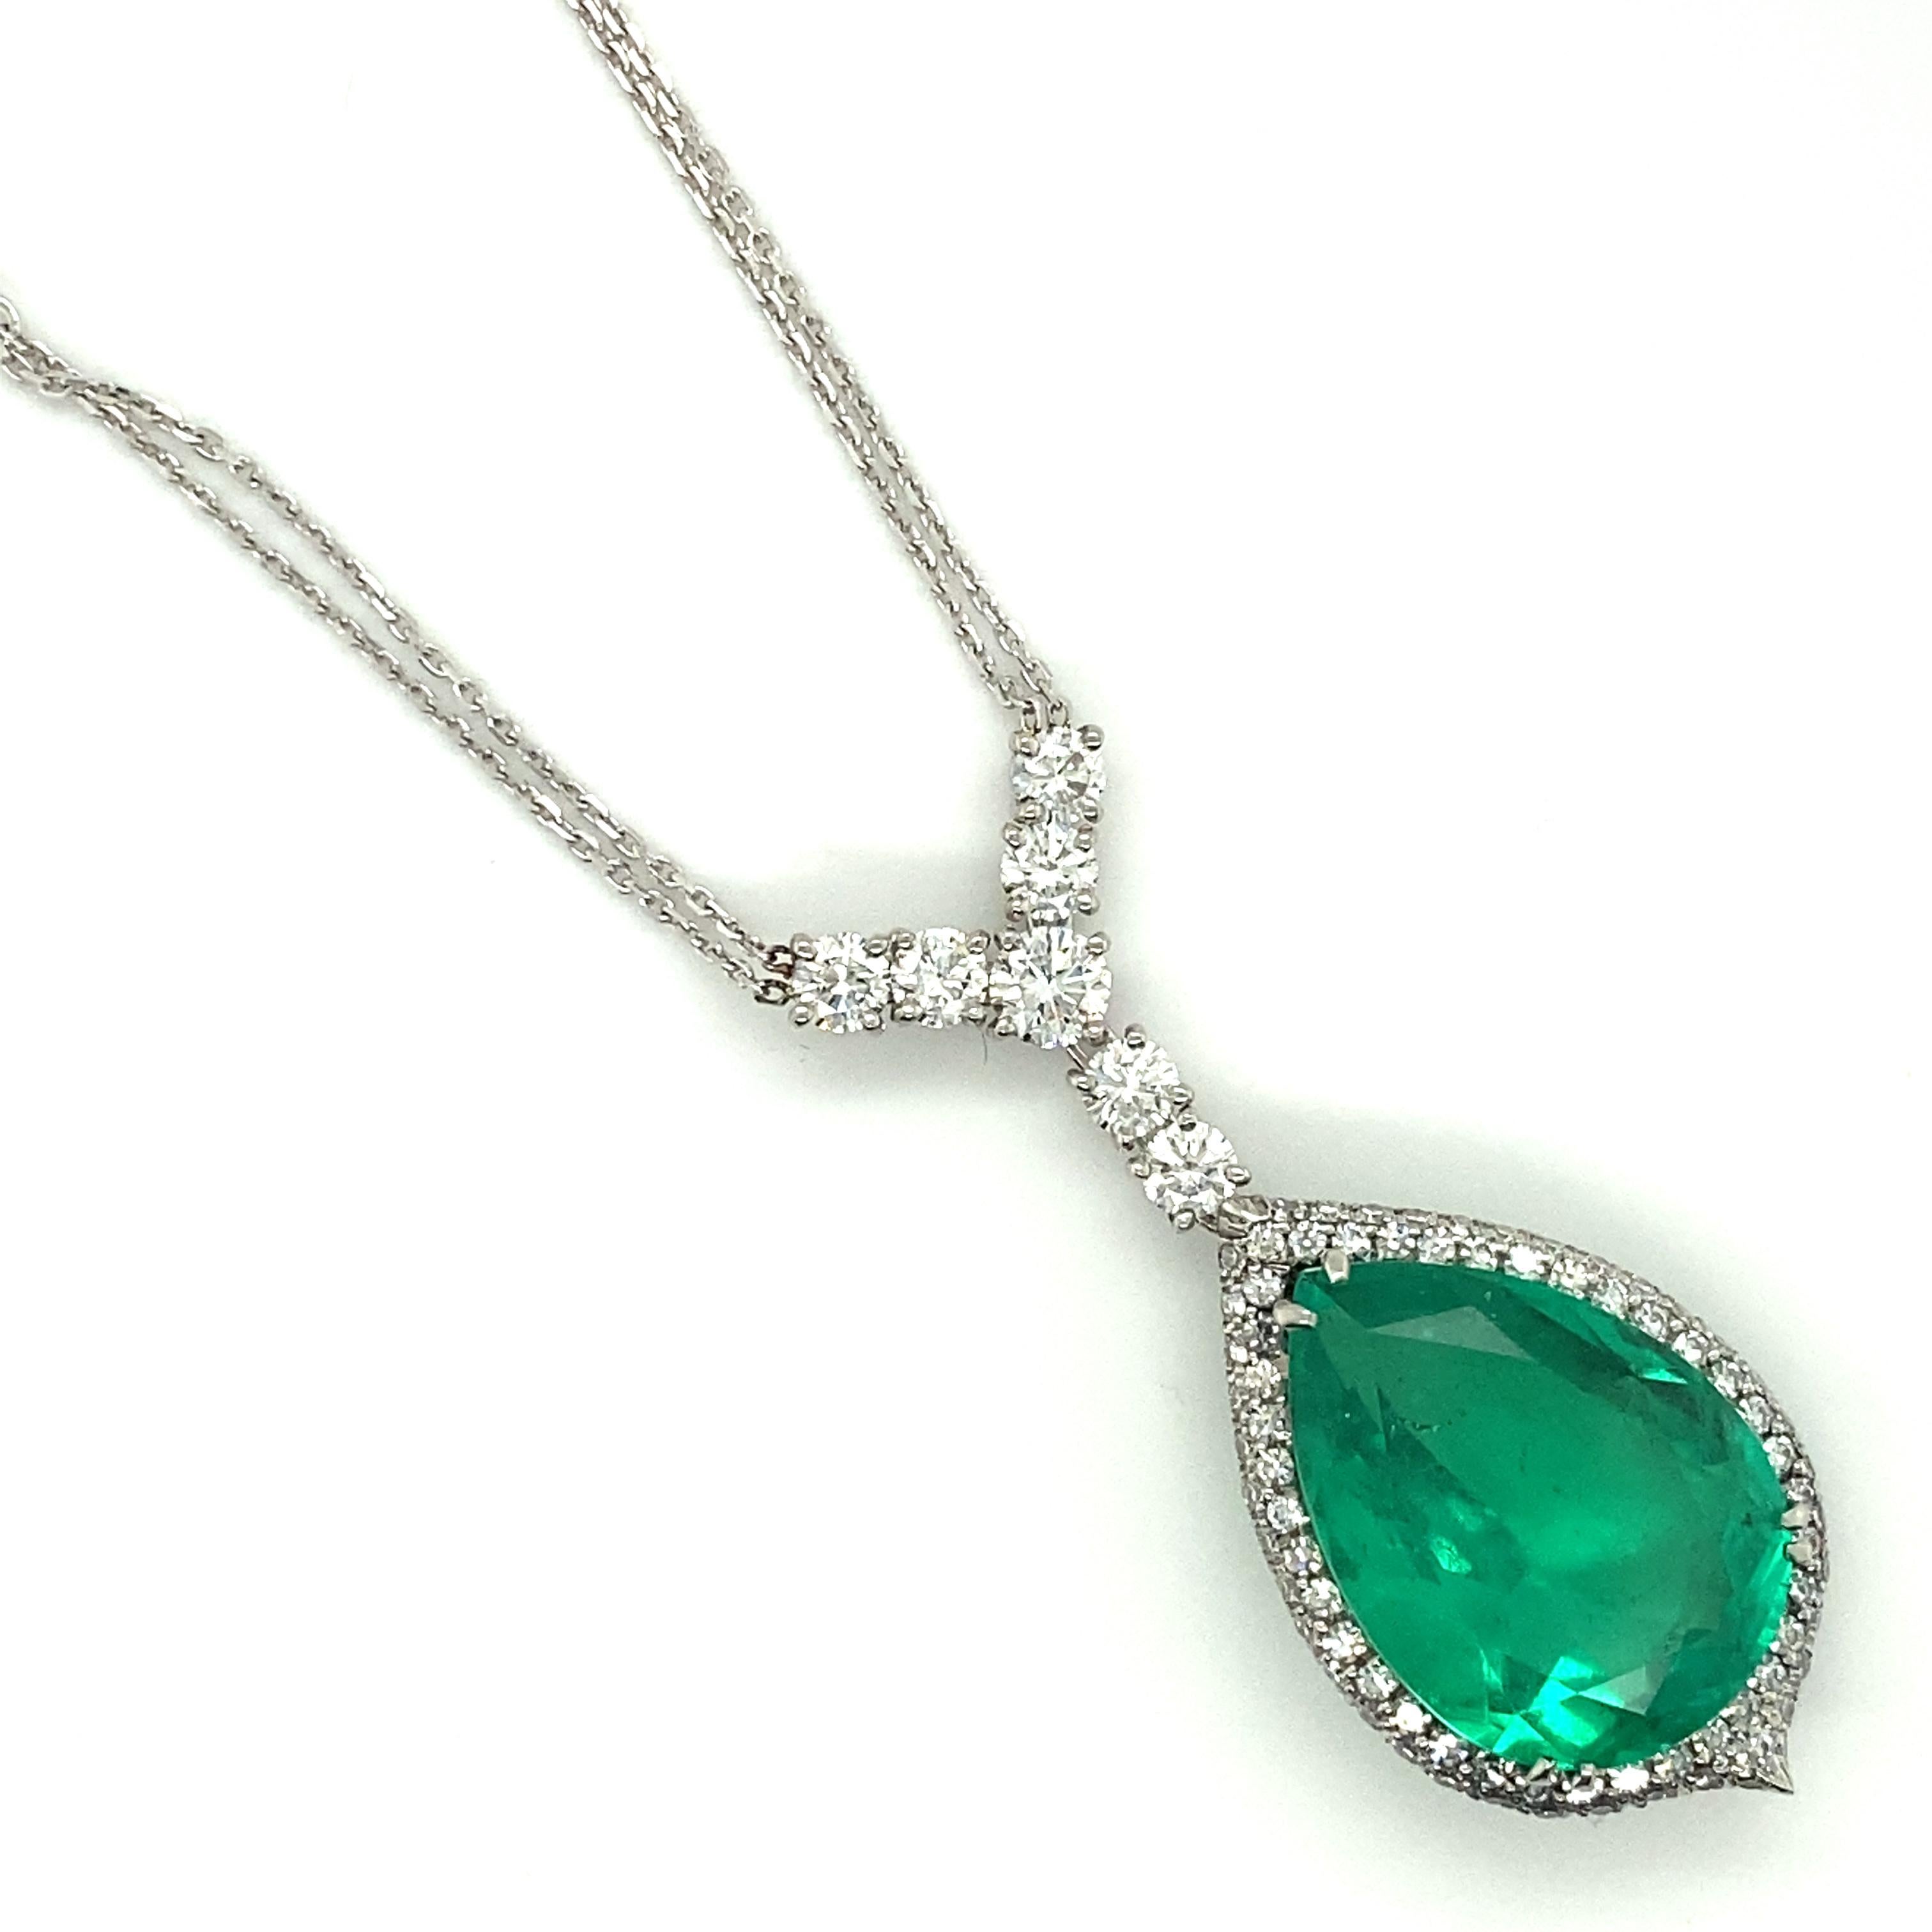 This hand-crafted platinum pendant was custom designed to accentuate the central 14.79ct GIA certified Colombian emerald.  This large stone exhibits a crystal, bluish green color and excellent clarity, especially by Colombian emerald standards.  